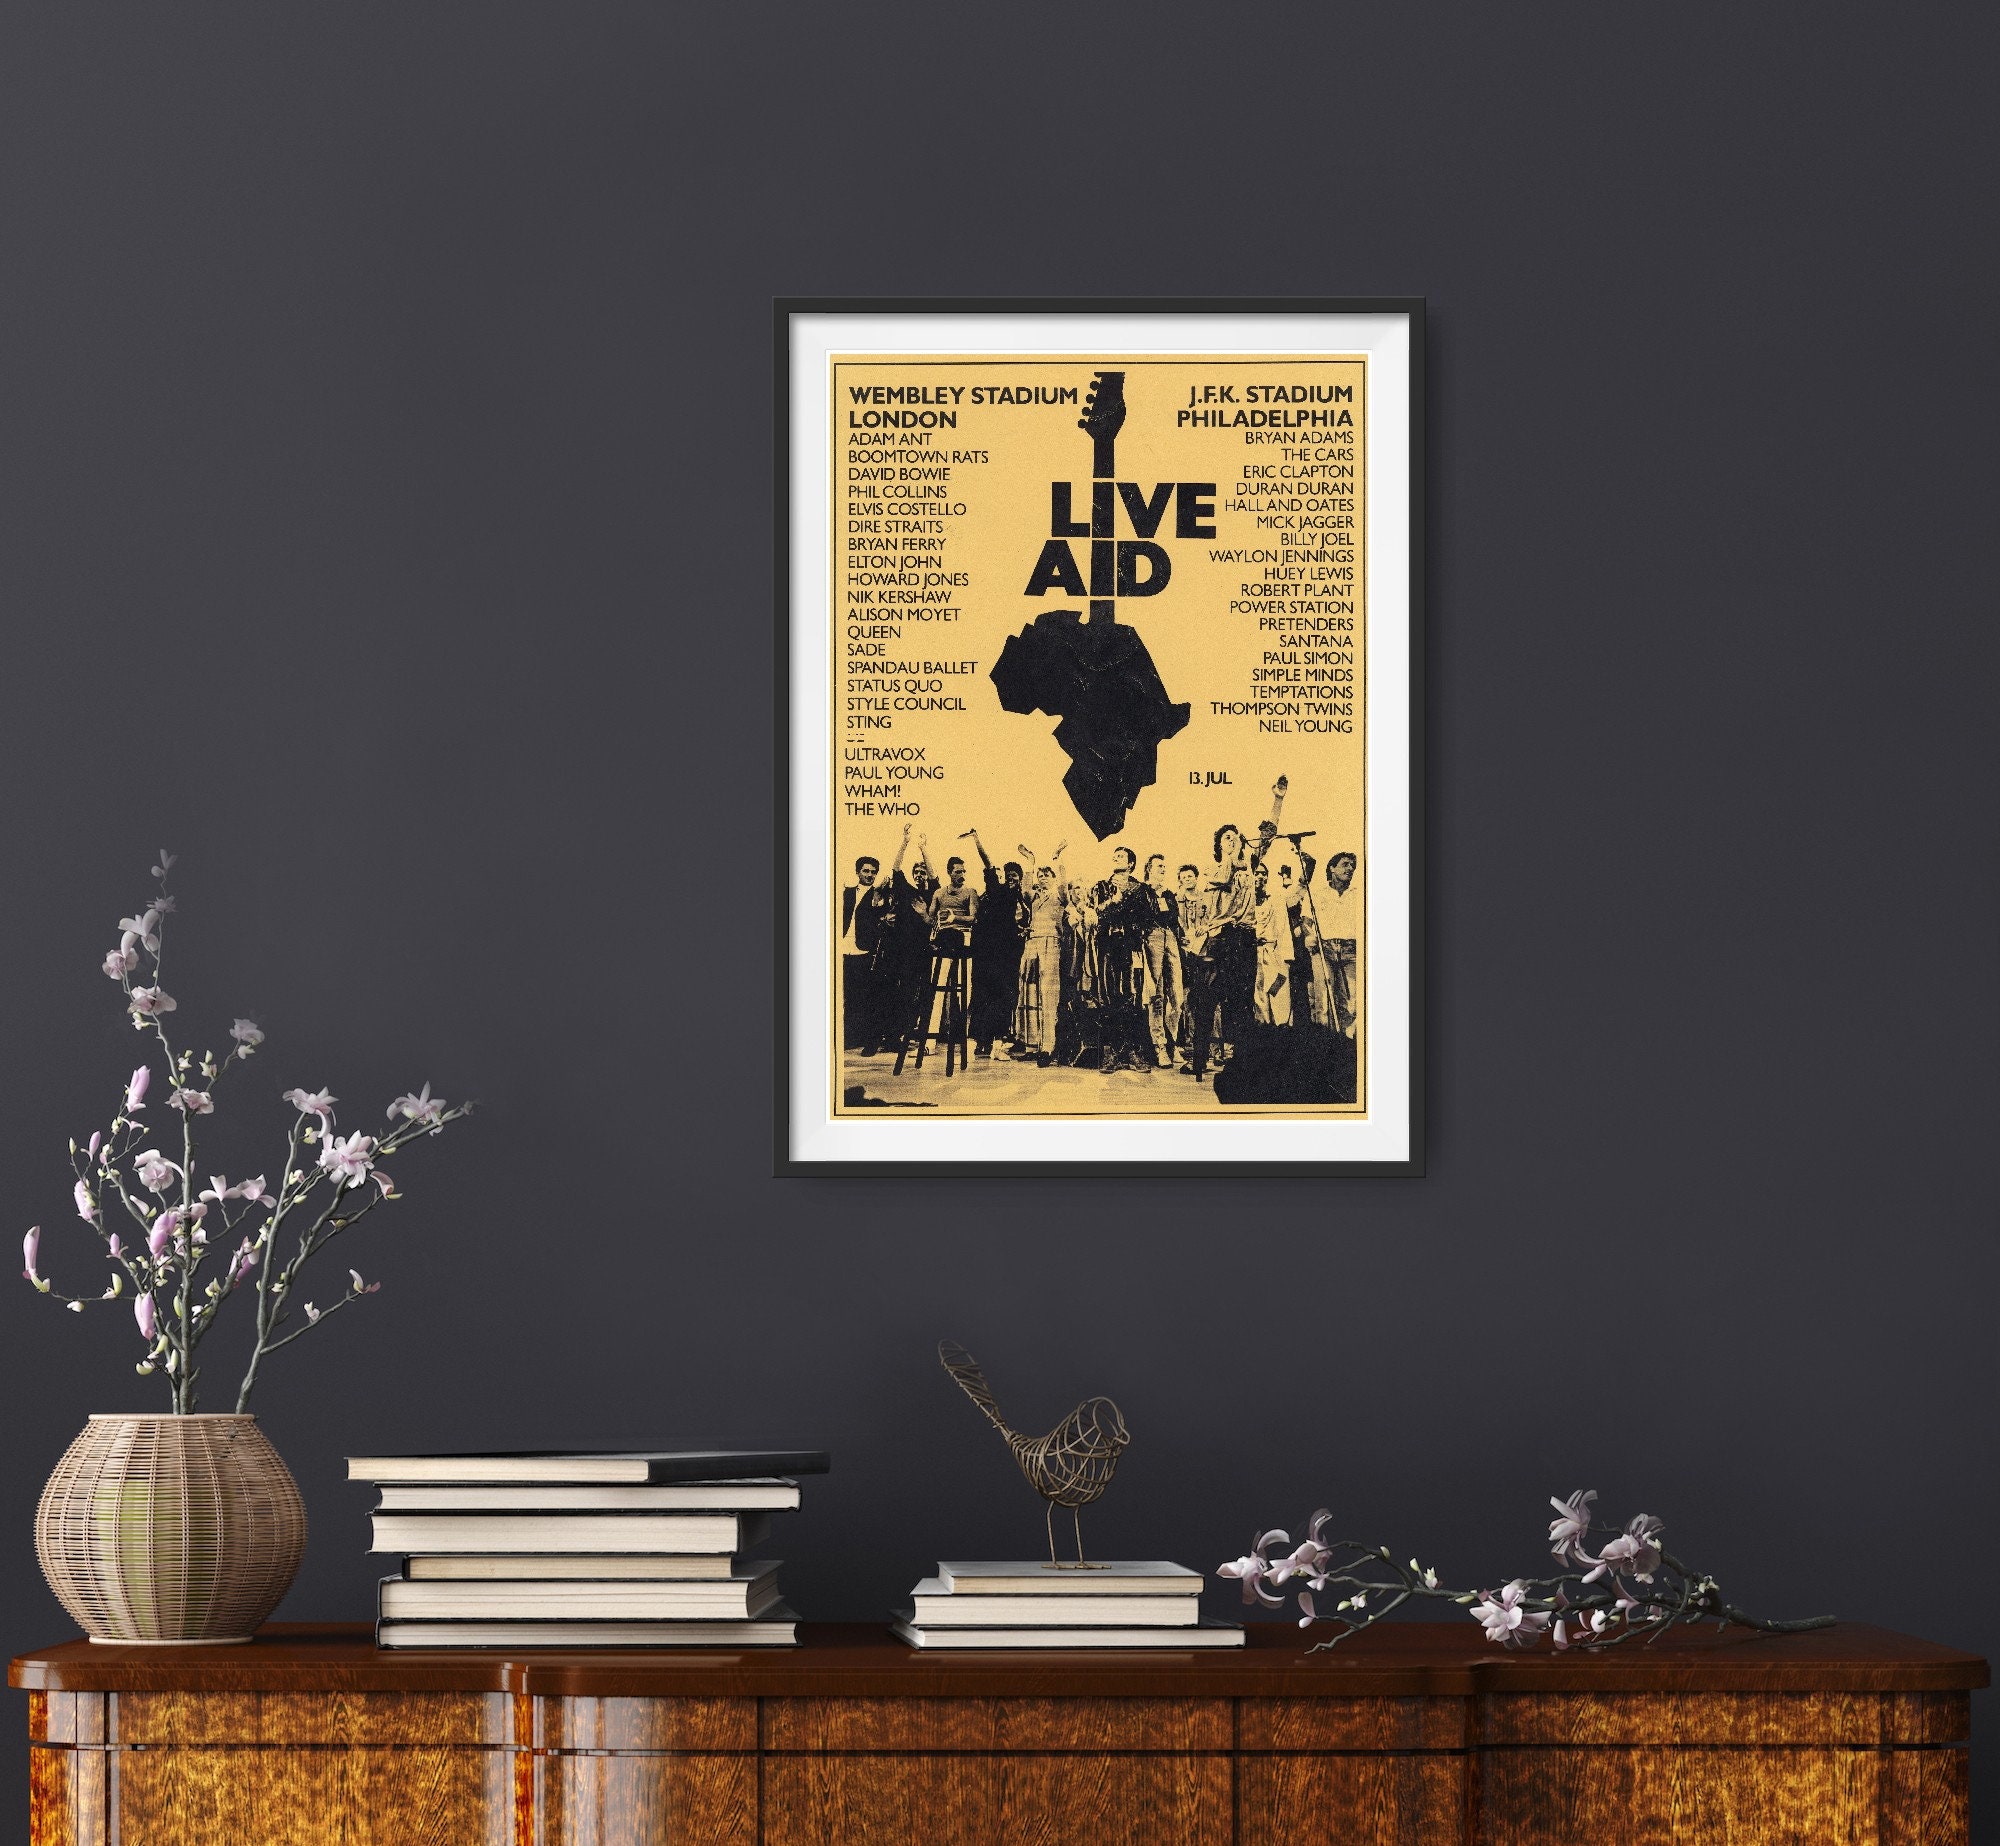 Discover Retro Style Live Aid Poster featuring Band names in London and Philadelphia Concerts 1985The Rolling Poster House